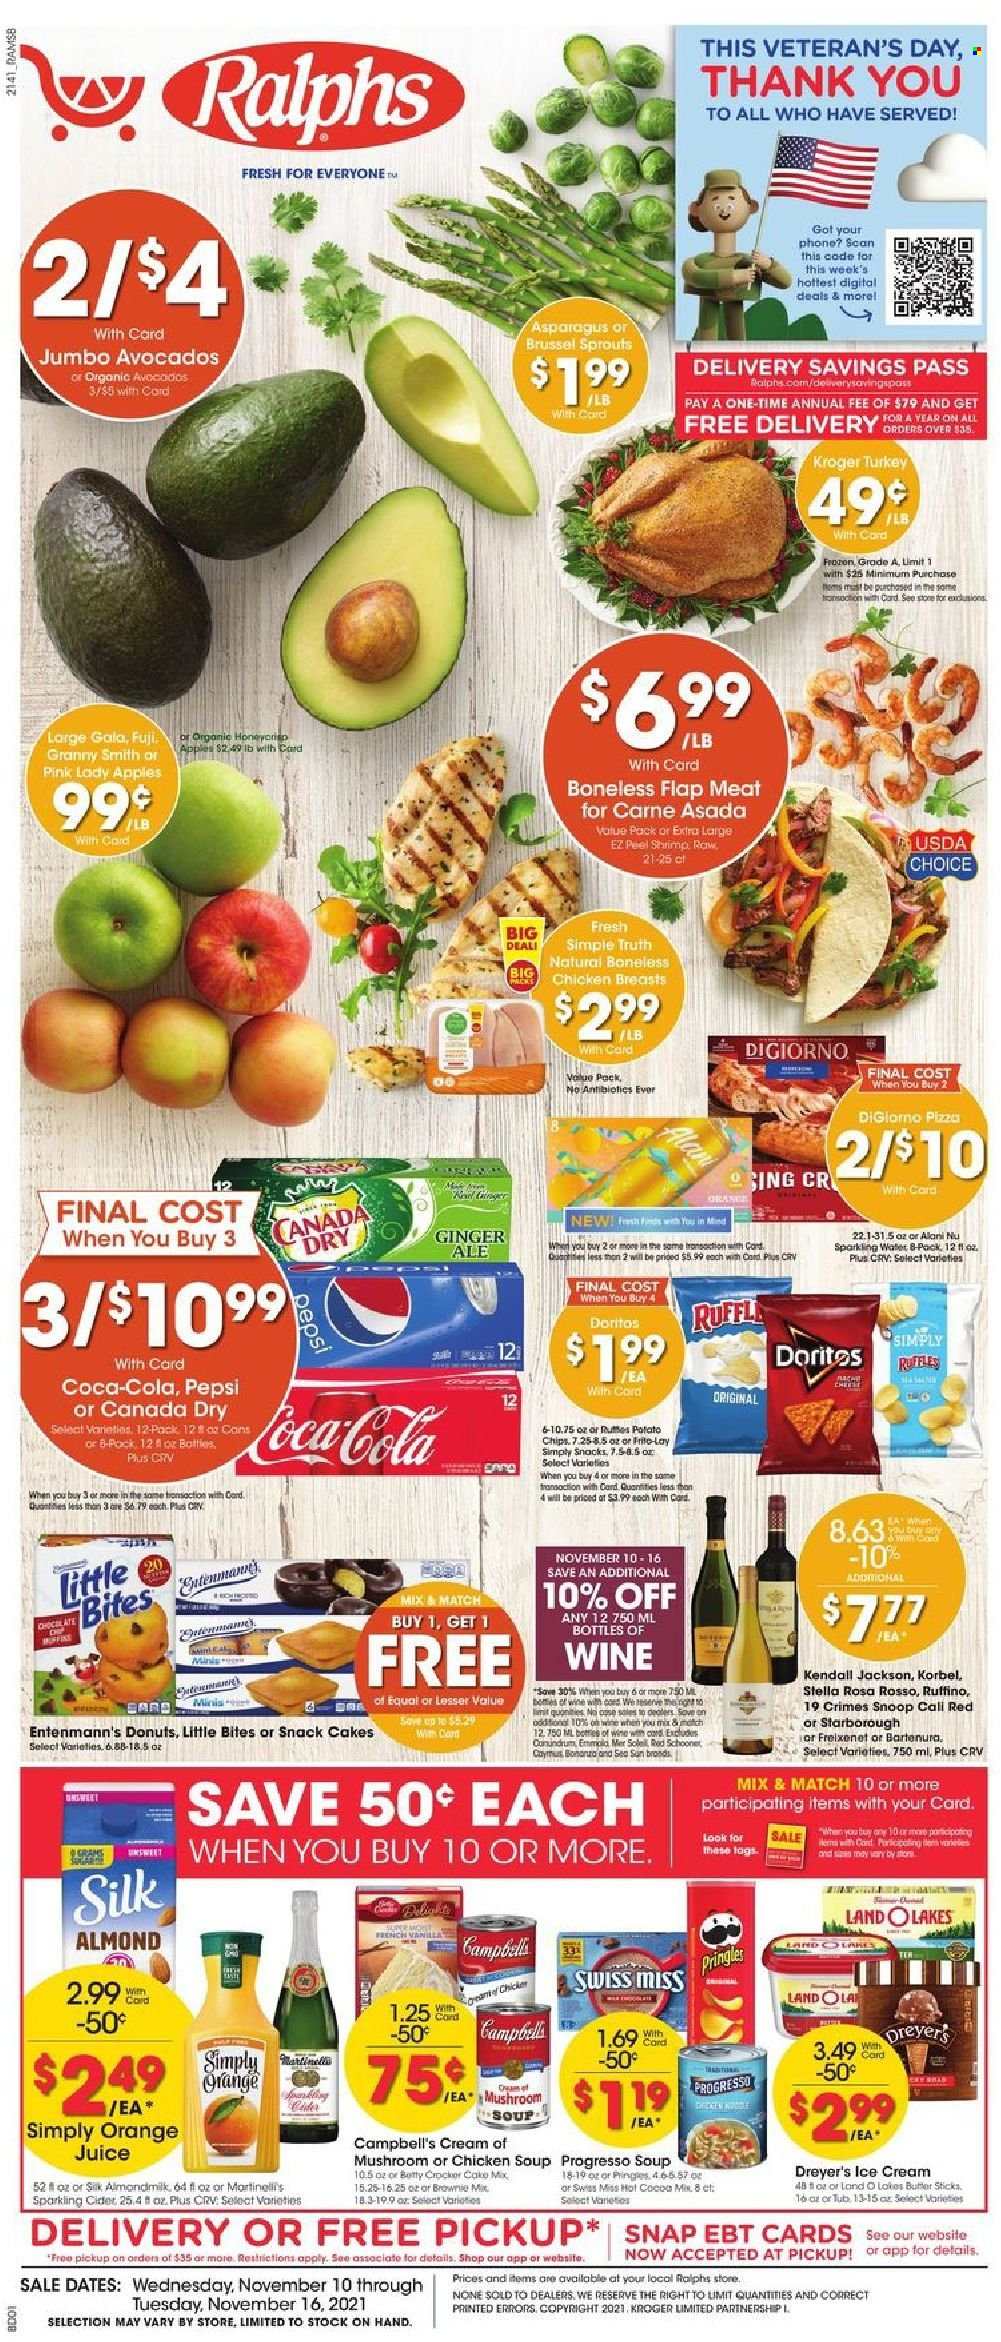 thumbnail - Ralphs Flyer - 11/10/2021 - 11/16/2021 - Sales products - cake, donut, Entenmann's, brownie mix, asparagus, brussel sprouts, apples, avocado, Gala, Granny Smith, shrimps, Campbell's, mushroom soup, pizza, chicken soup, Progresso, Swiss Miss, almond milk, Silk, butter, ice cream, Ola, Little Bites, Doritos, Pringles, chips, Canada Dry, Coca-Cola, ginger ale, Pepsi, orange juice, juice, hot cocoa, sparkling cider, sparkling wine, wine, cider, chicken breasts. Page 1.